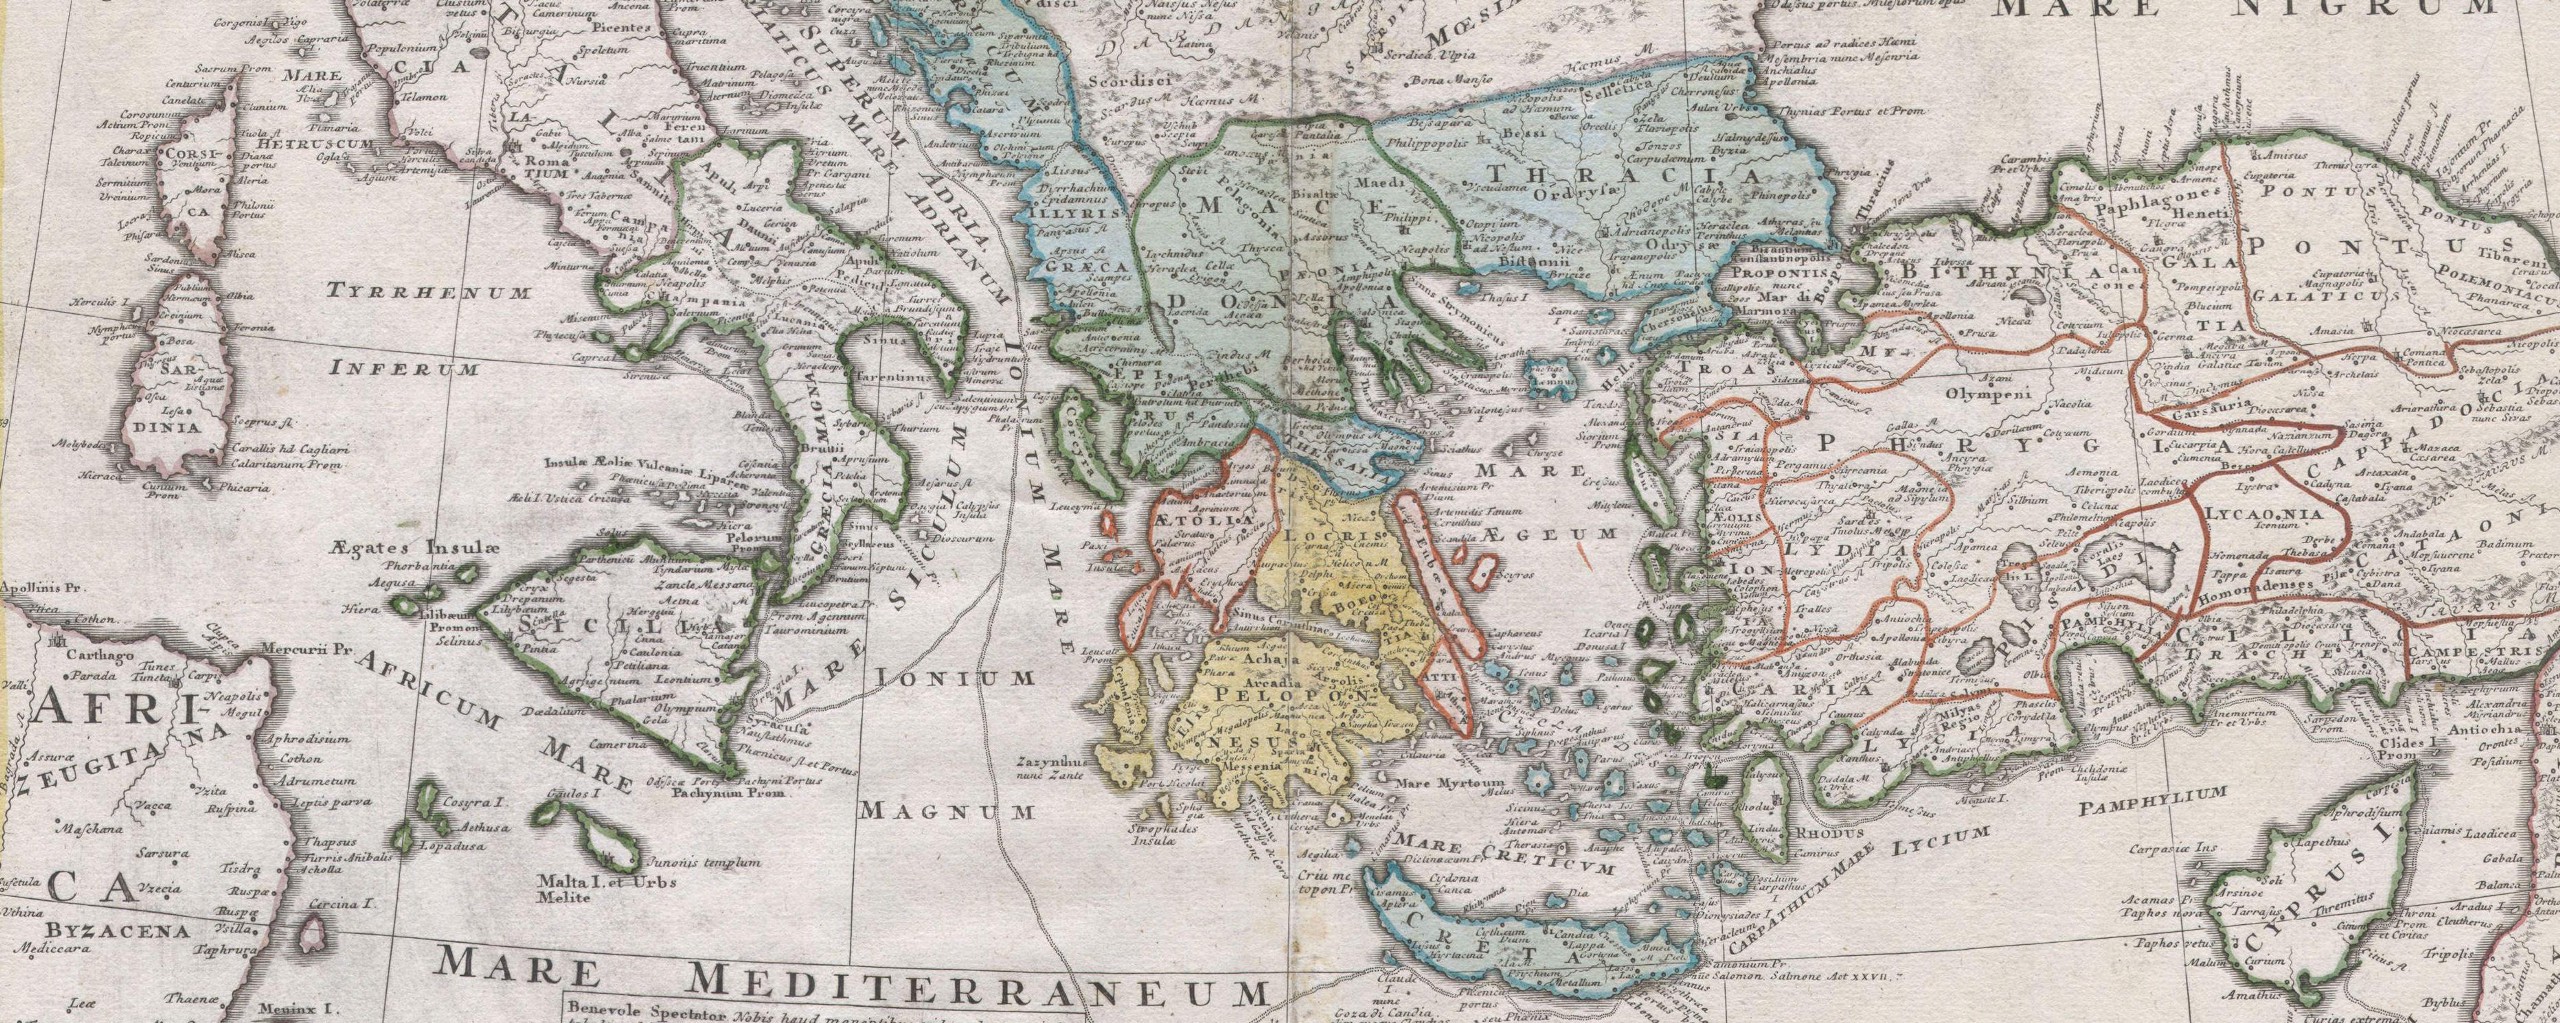 A map of Greece and surrounding areas circa 1741.